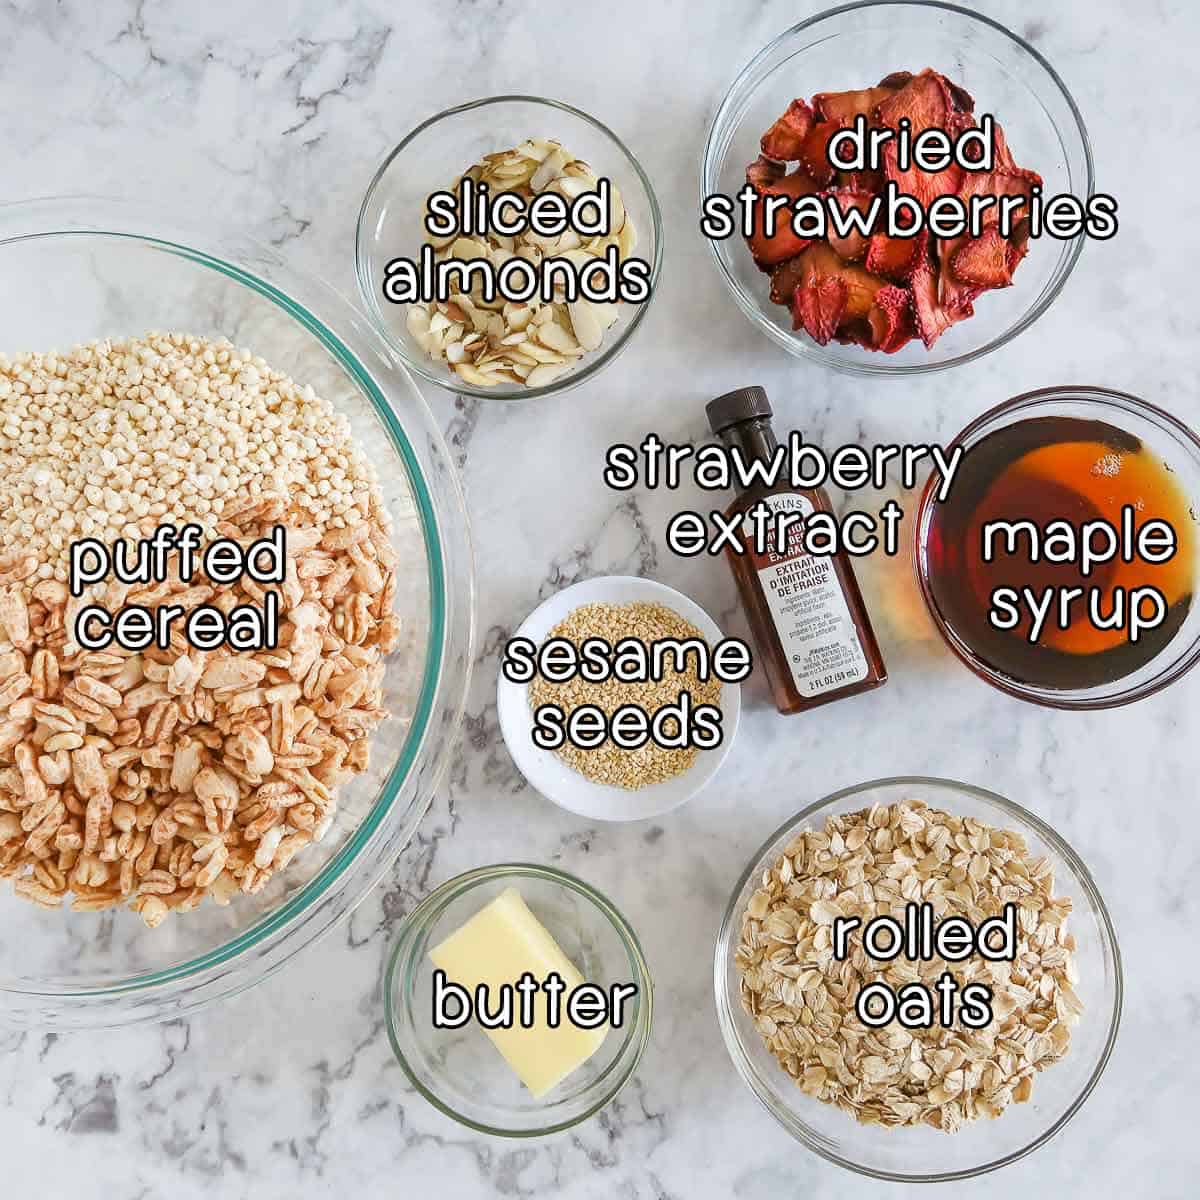 Overhead shot of ingredients- dried strawberries, sliced almonds, puffed cereal, strawberry extract, maple syrup, sesame seeds, butter, and rolled oats.